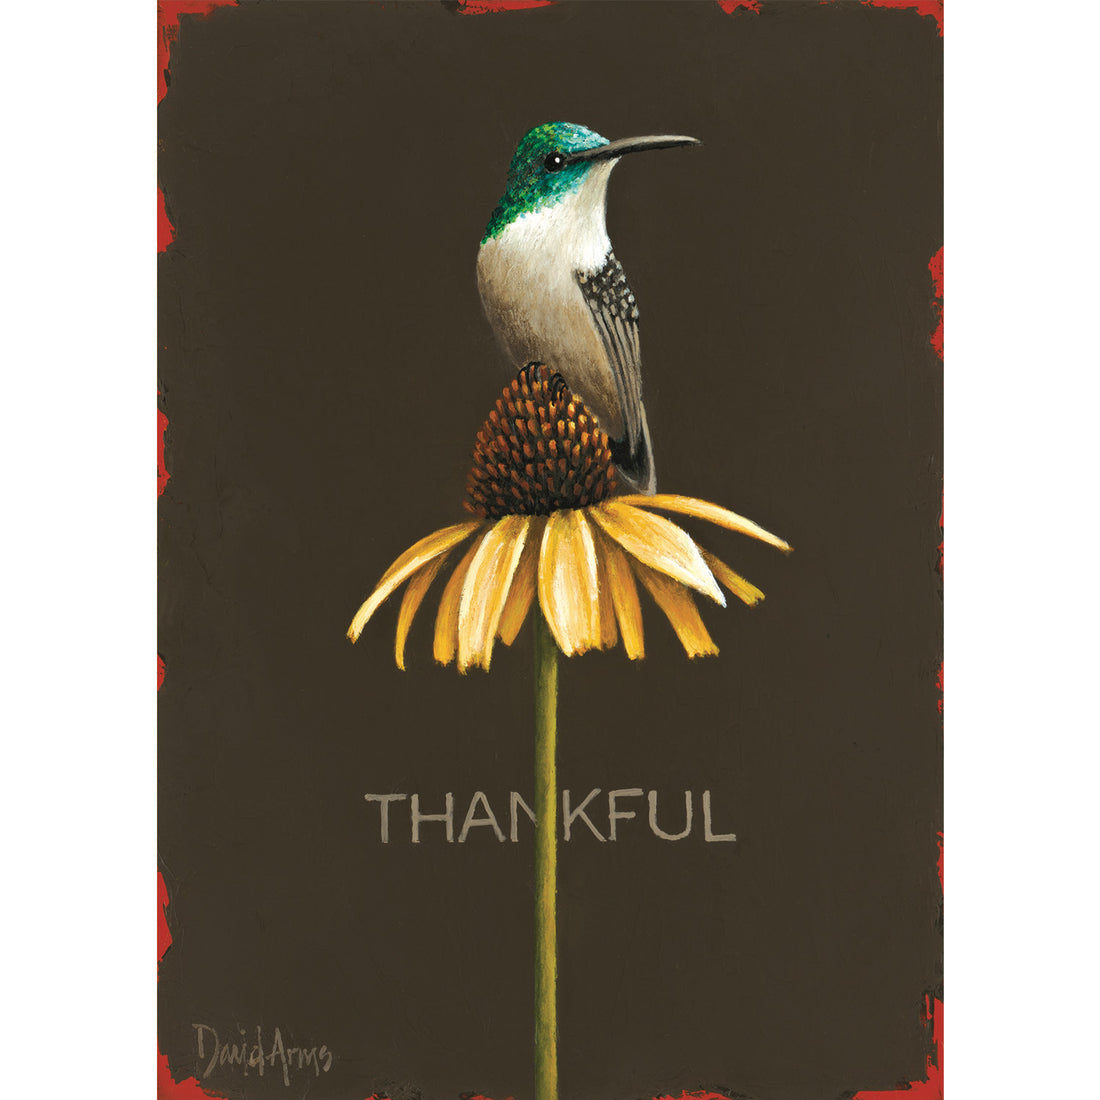 An illustration of a white and green hummingbird resting on a yellow flower on a long green stem over a dark brown background, with &quot;THANKFUL&quot; printed behind the stem.